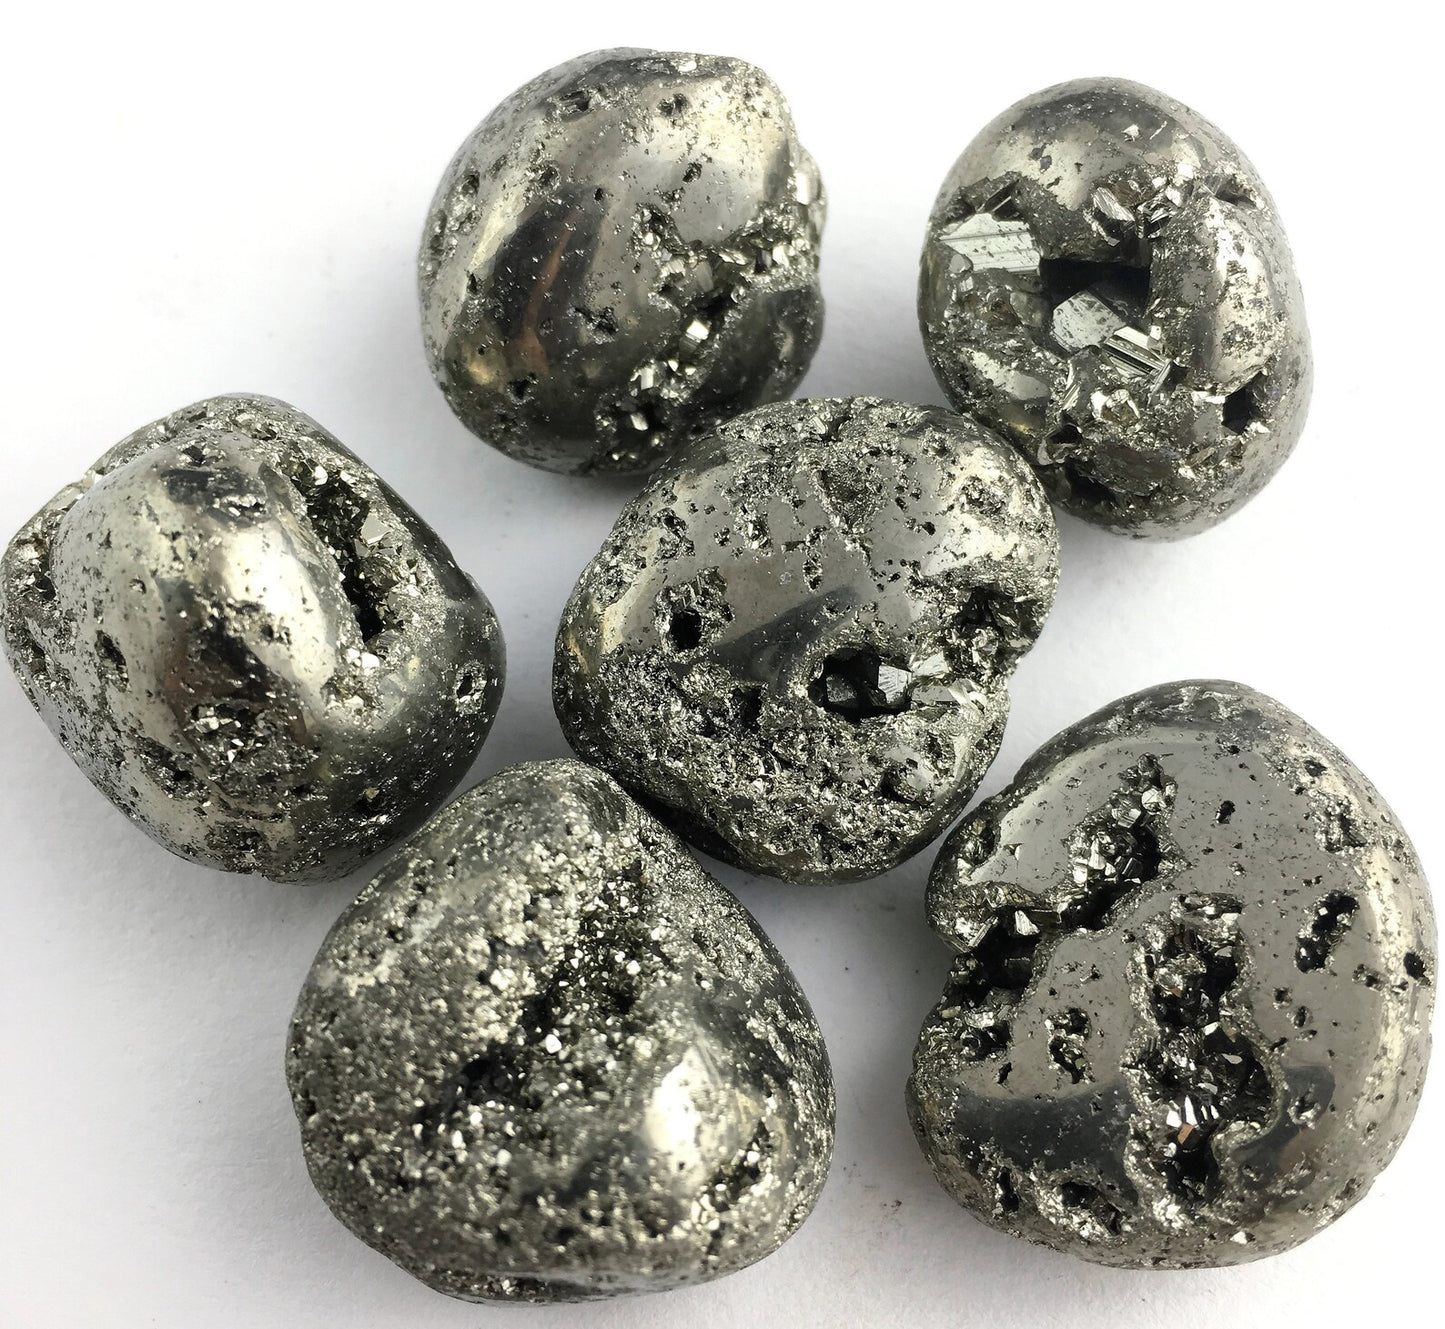 Pyrite Tumble Stone High Grade - Stone of Power, Luck and Protection